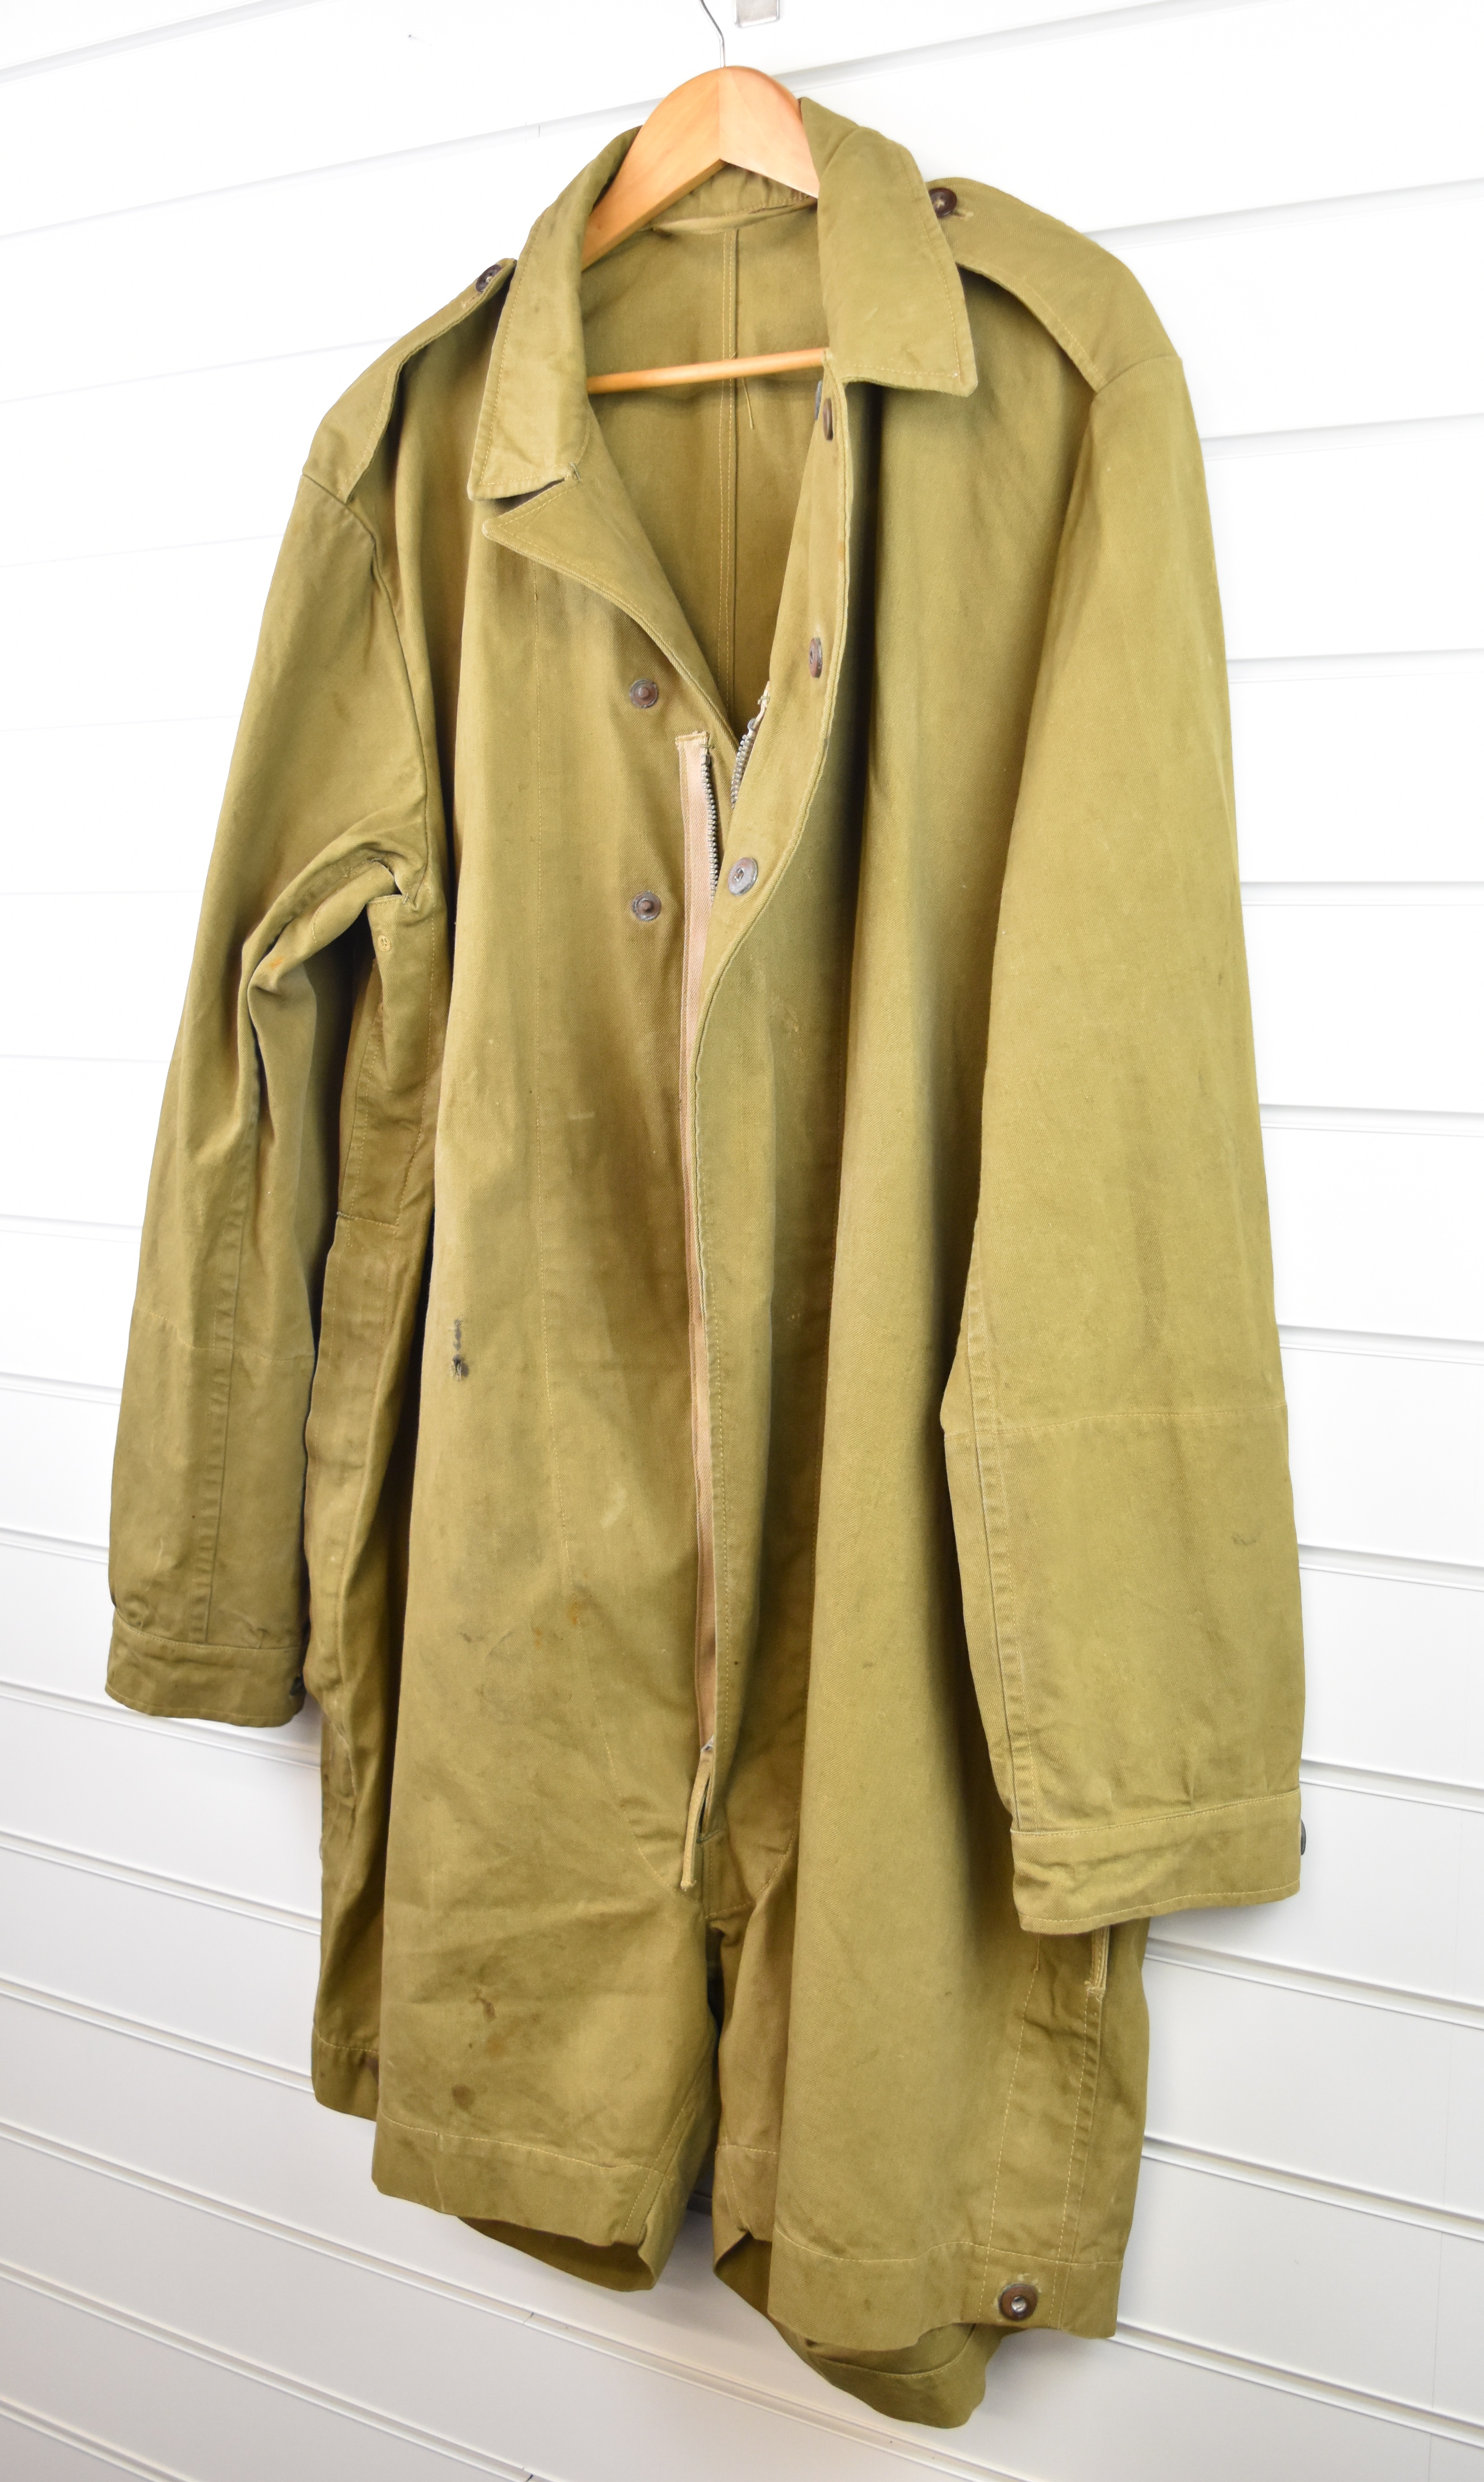 British WW2 Airborne 1st pattern 'Step In' paratrooper's smock with storm cuffs, ventilated underarm - Image 2 of 18